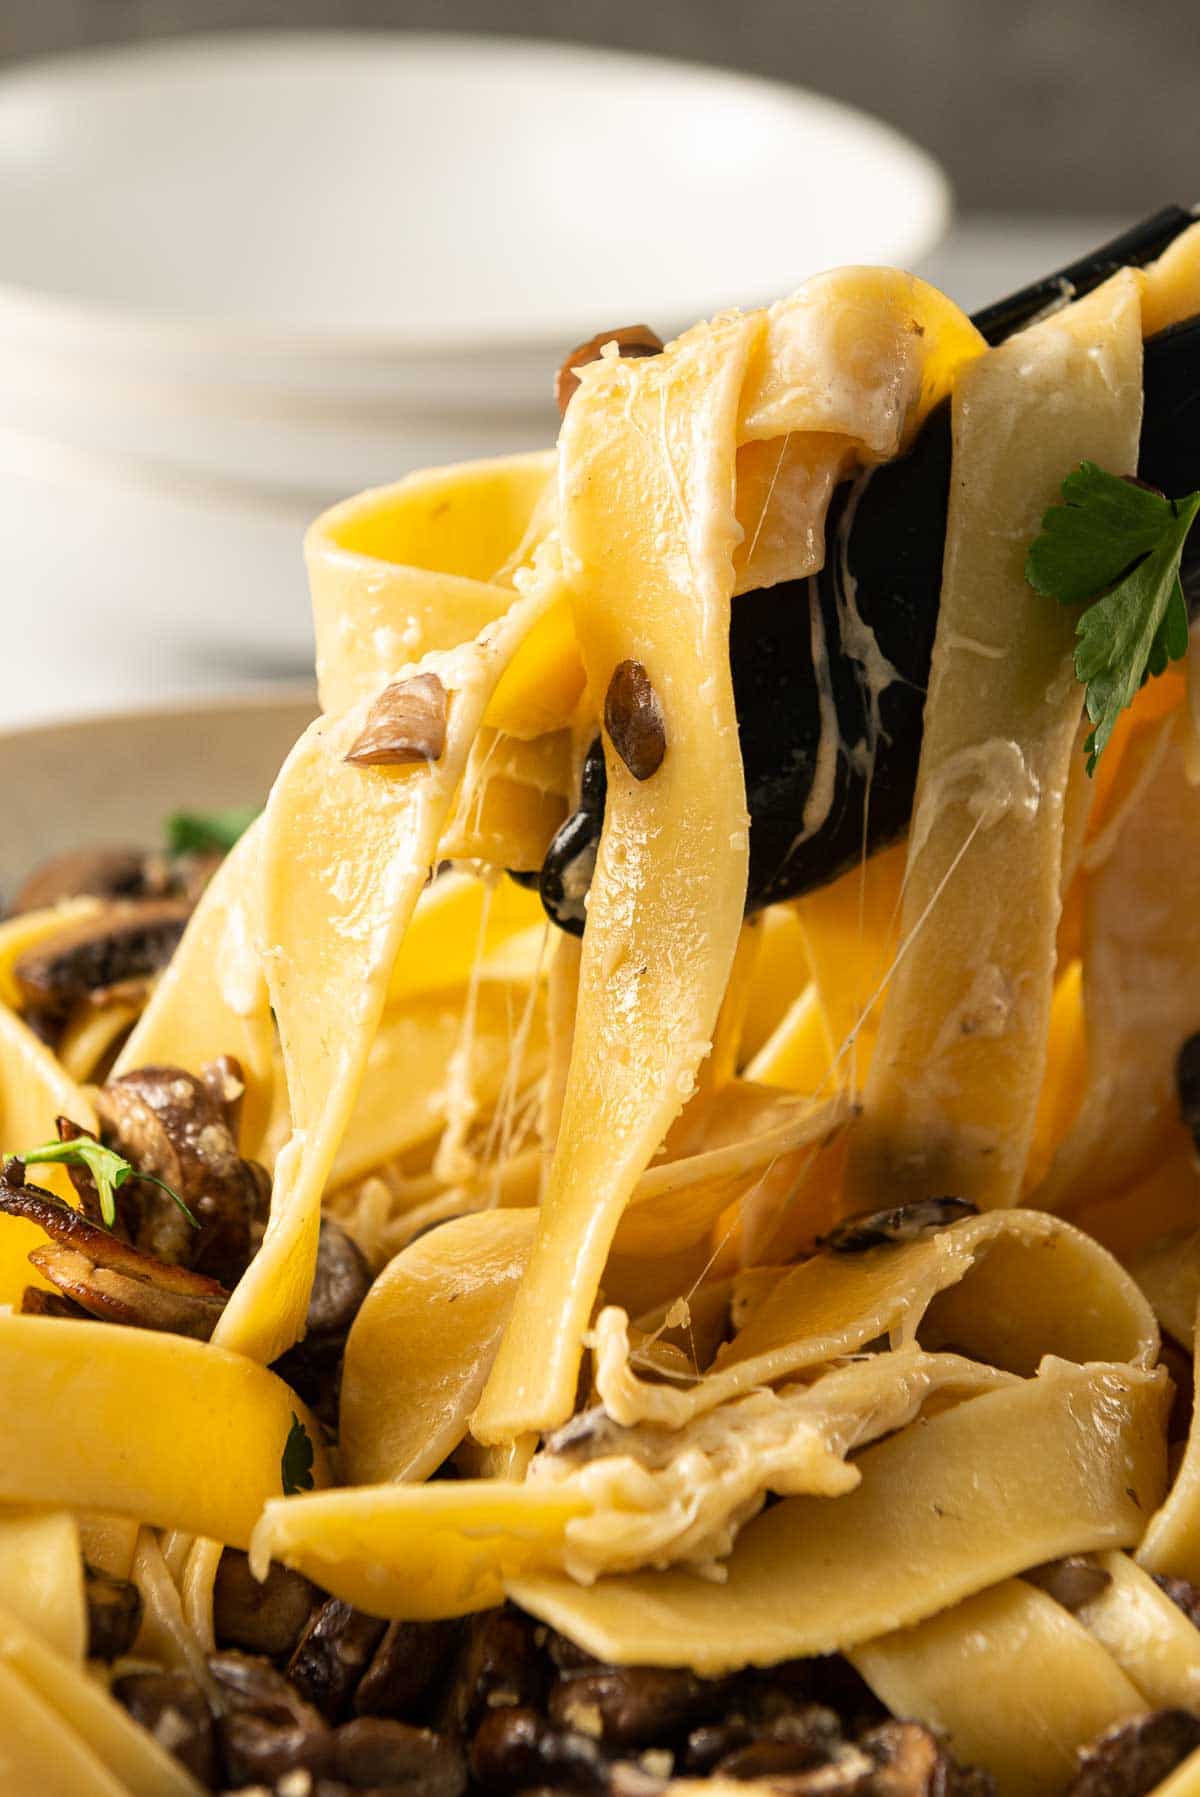 Cheesy pappardelle with mushrooms being picked up using tongs.